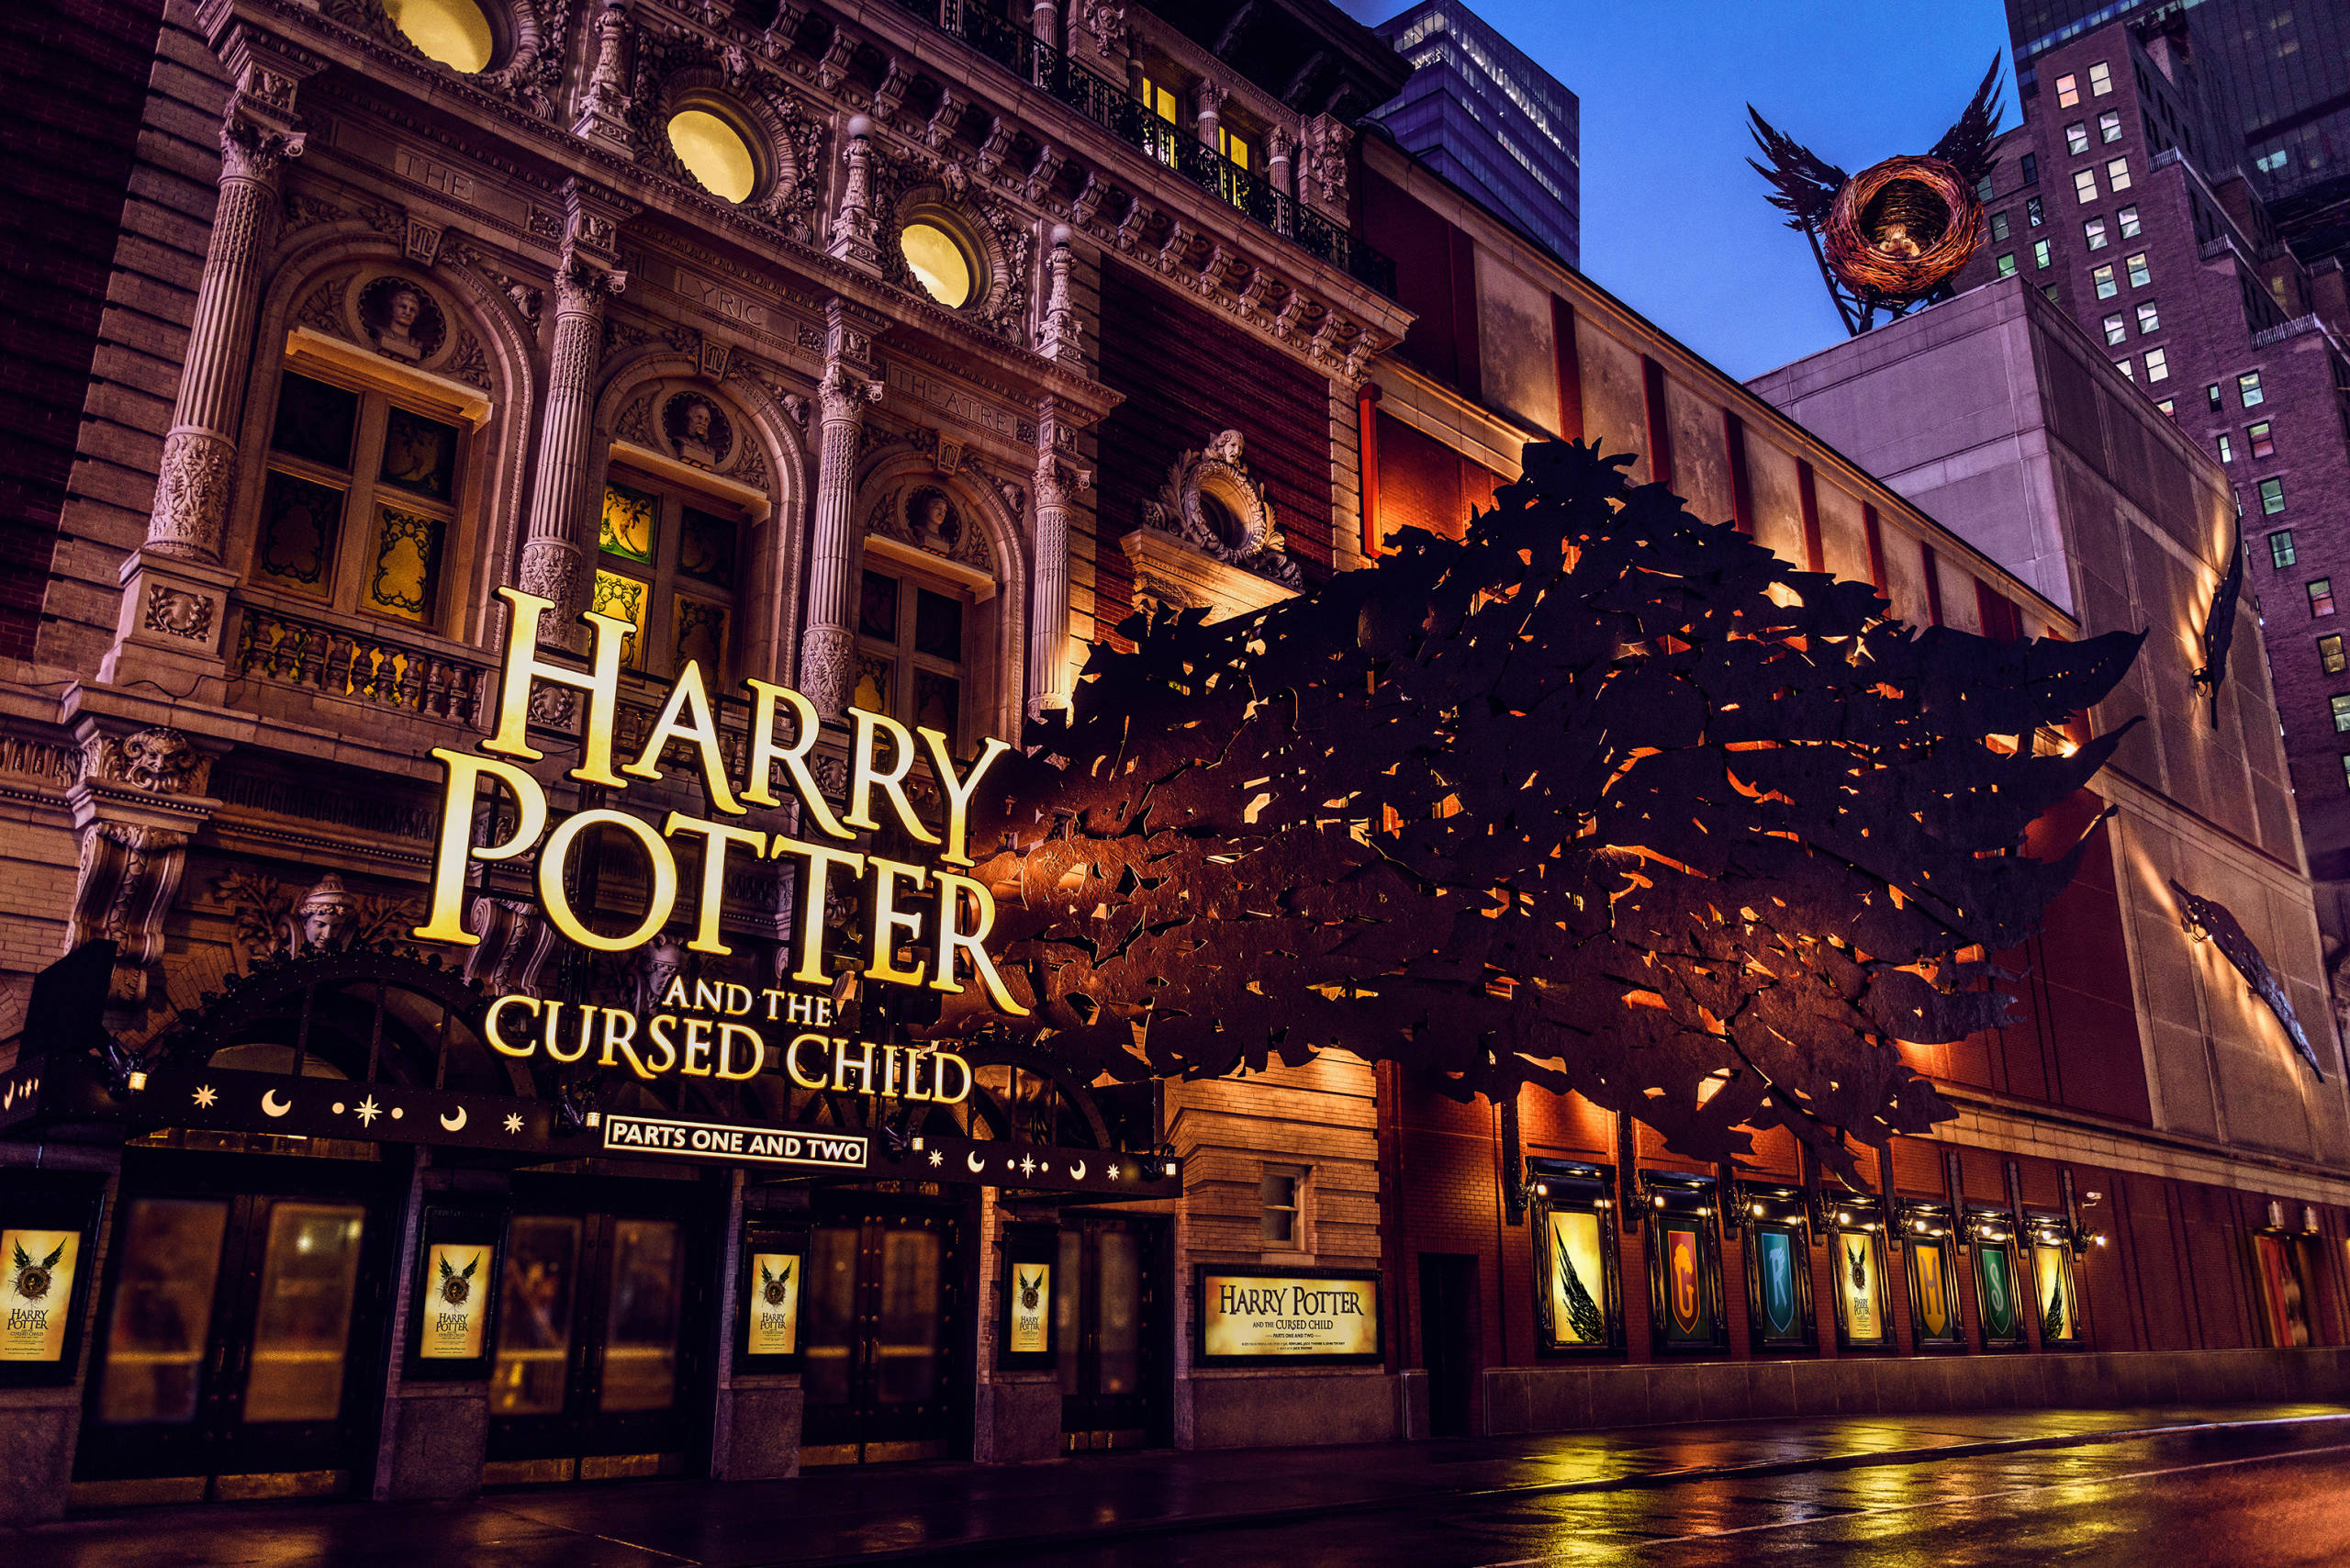 Harry Potter and the Cursed Child at the Lyric Theatre